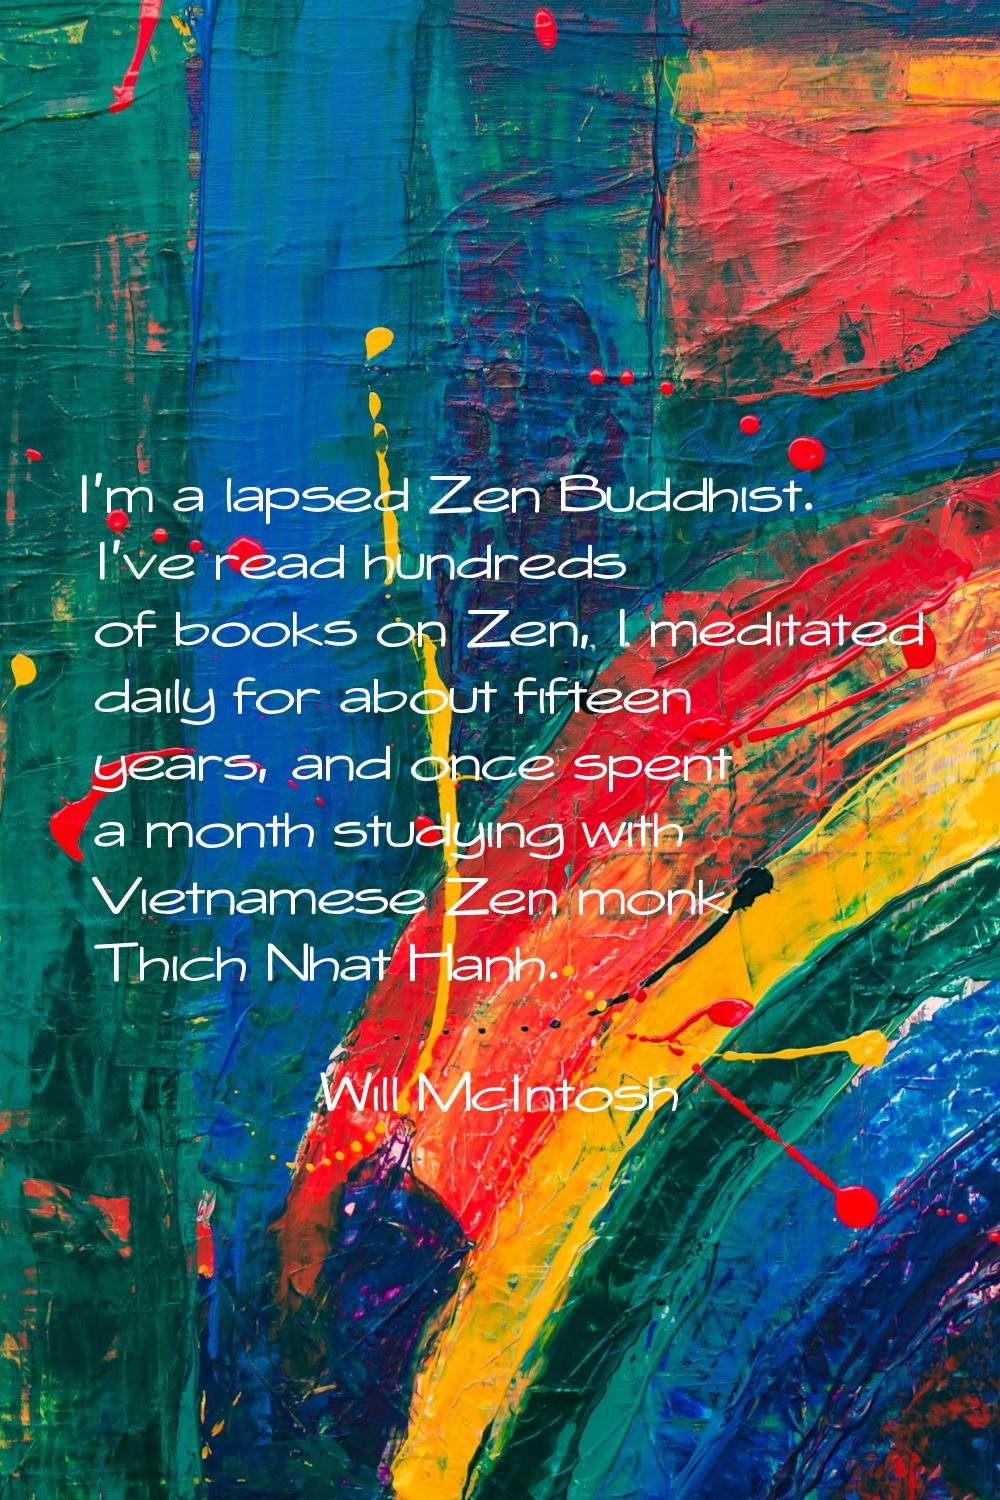 I'm a lapsed Zen Buddhist. I've read hundreds of books on Zen, I meditated daily for about fifteen 